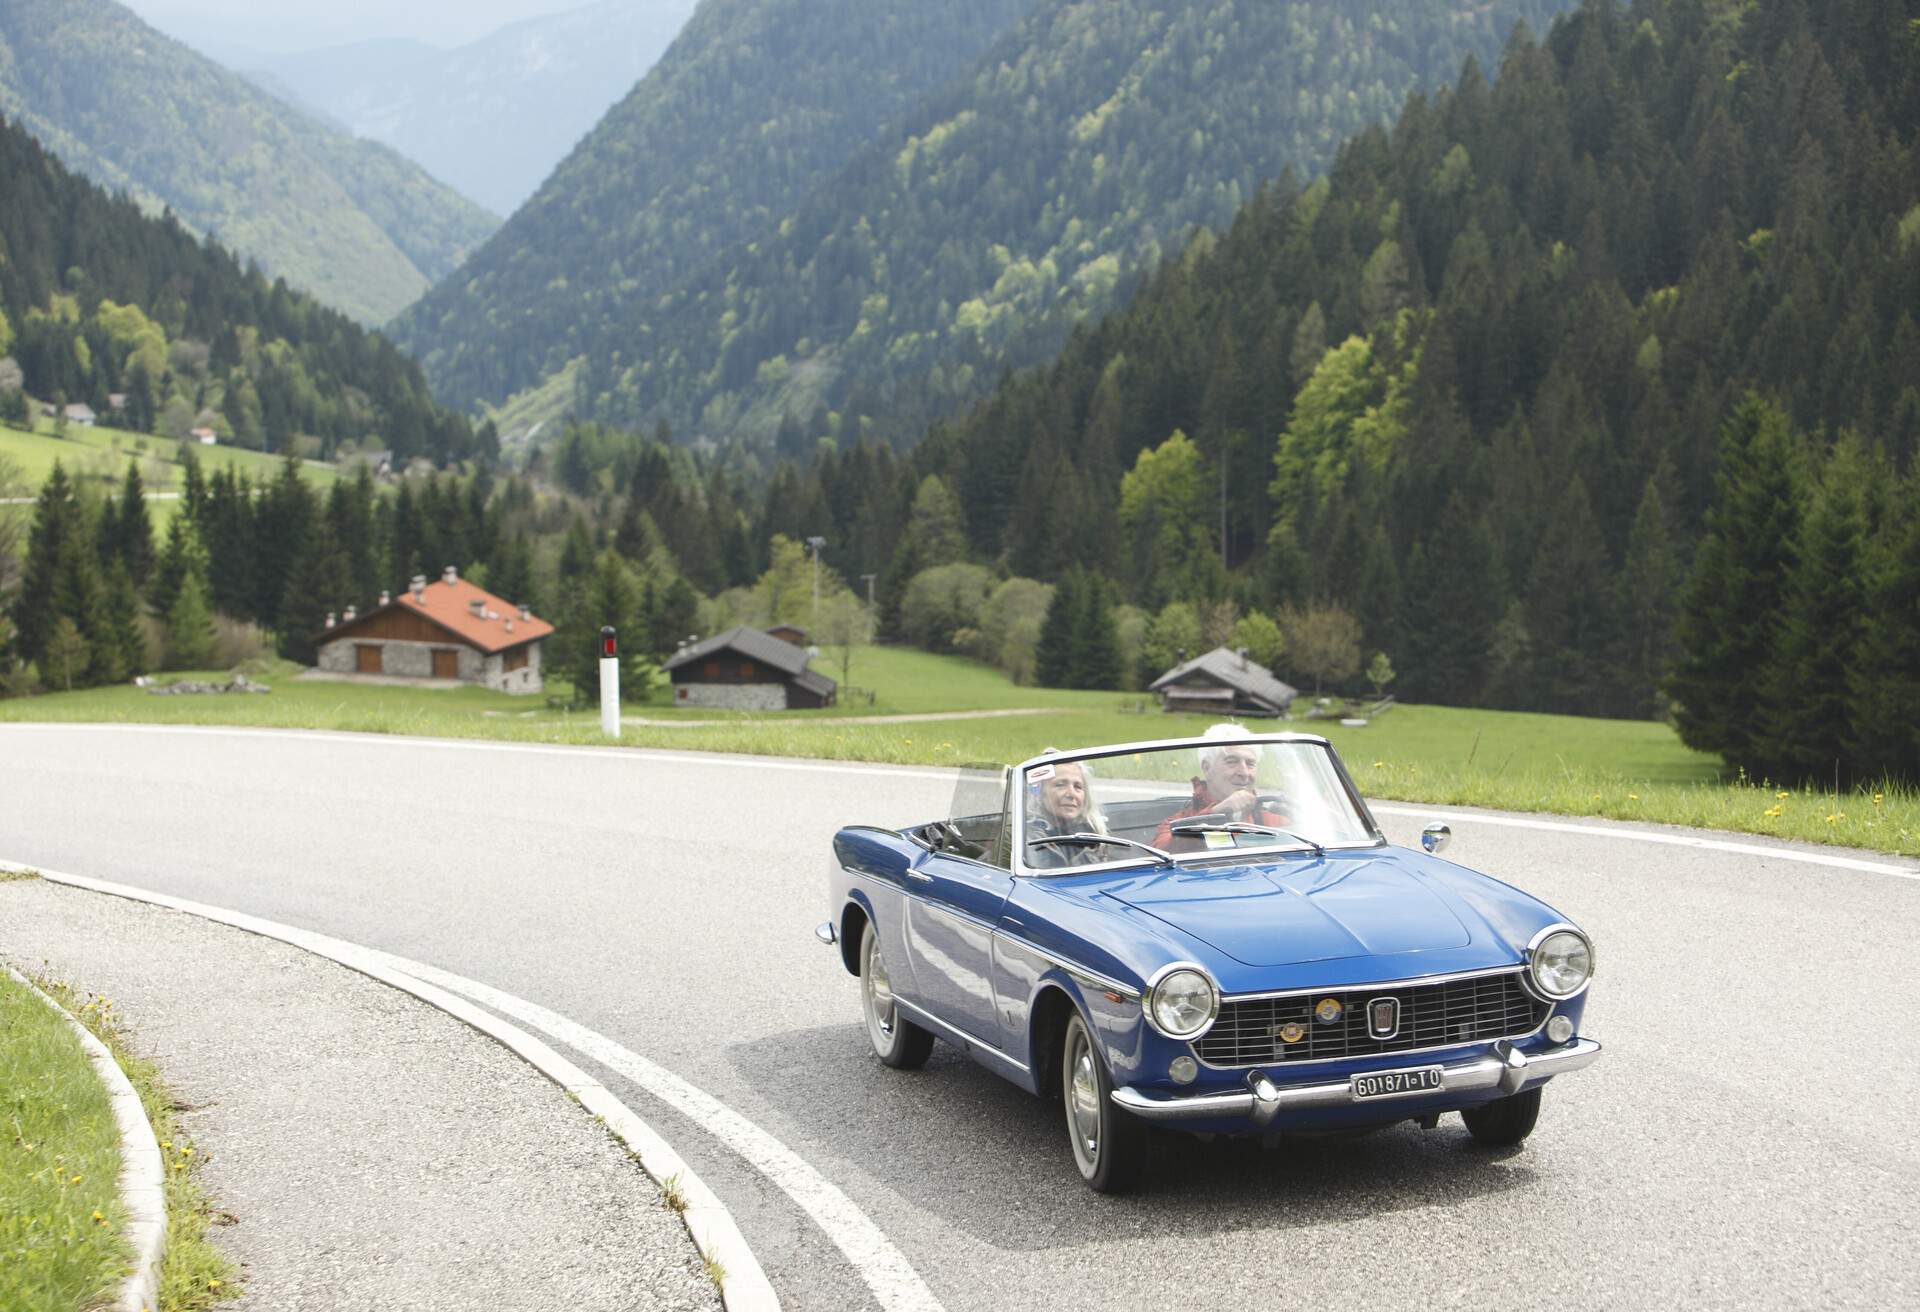 A couple is driving a convertible car on a mountain road